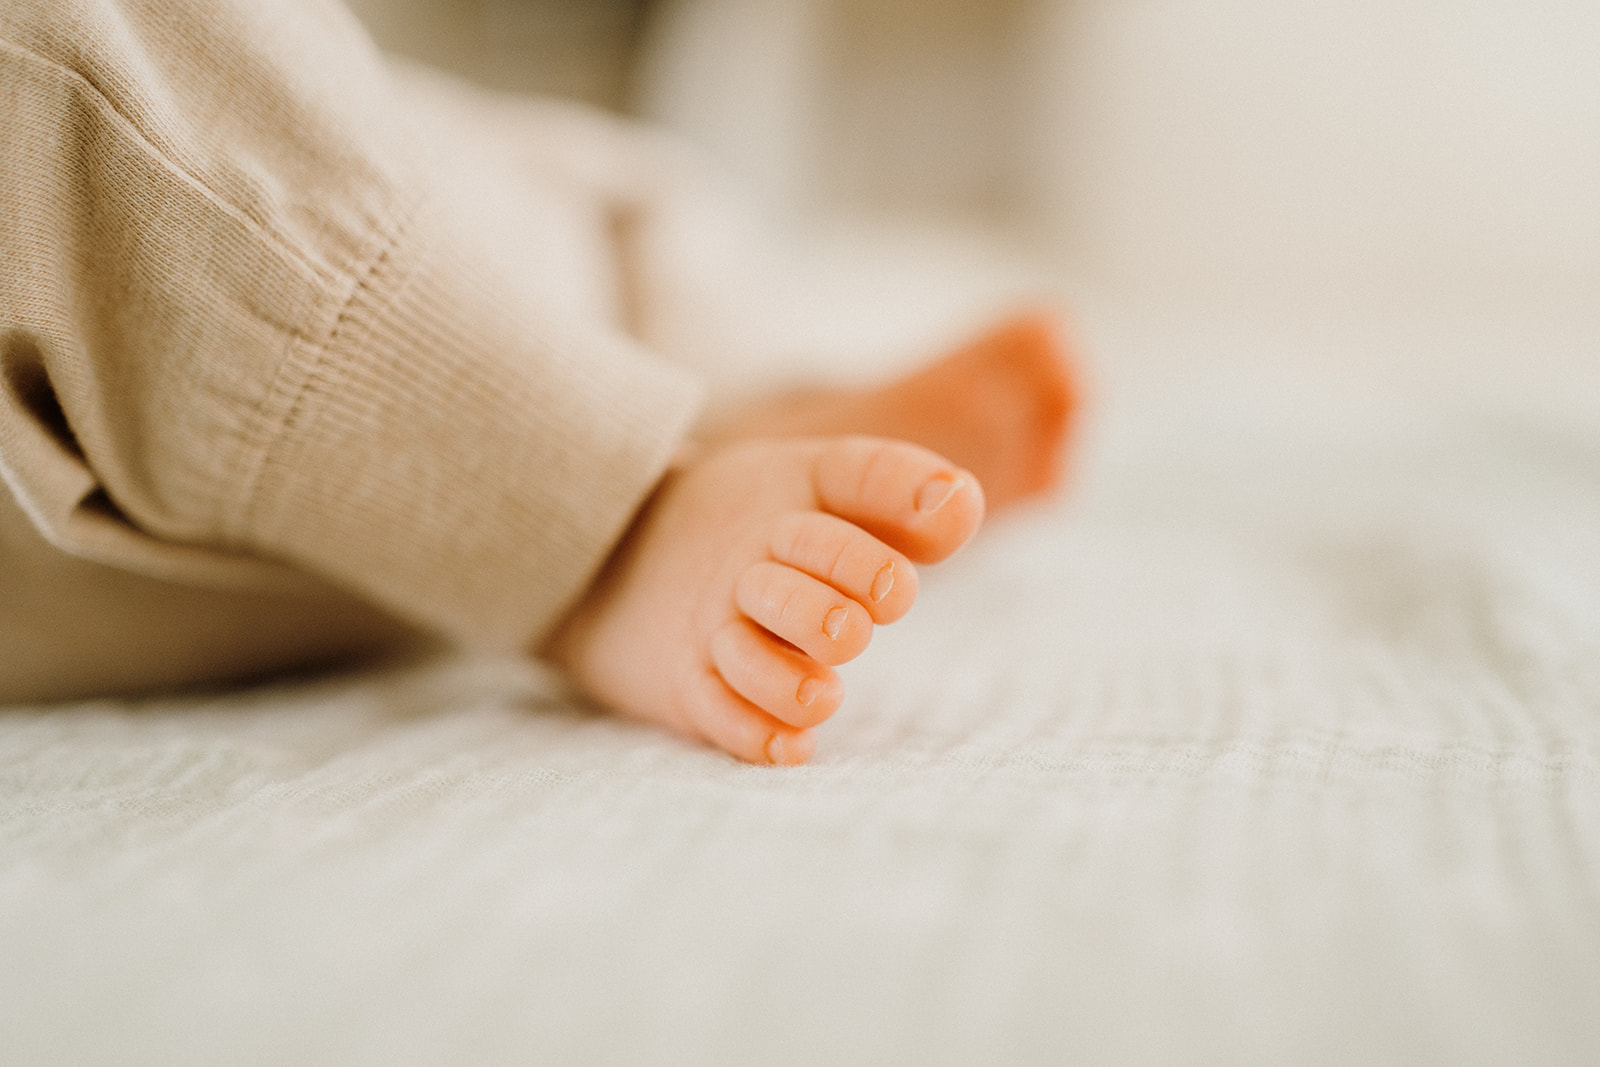 Newborn toes on the bed.